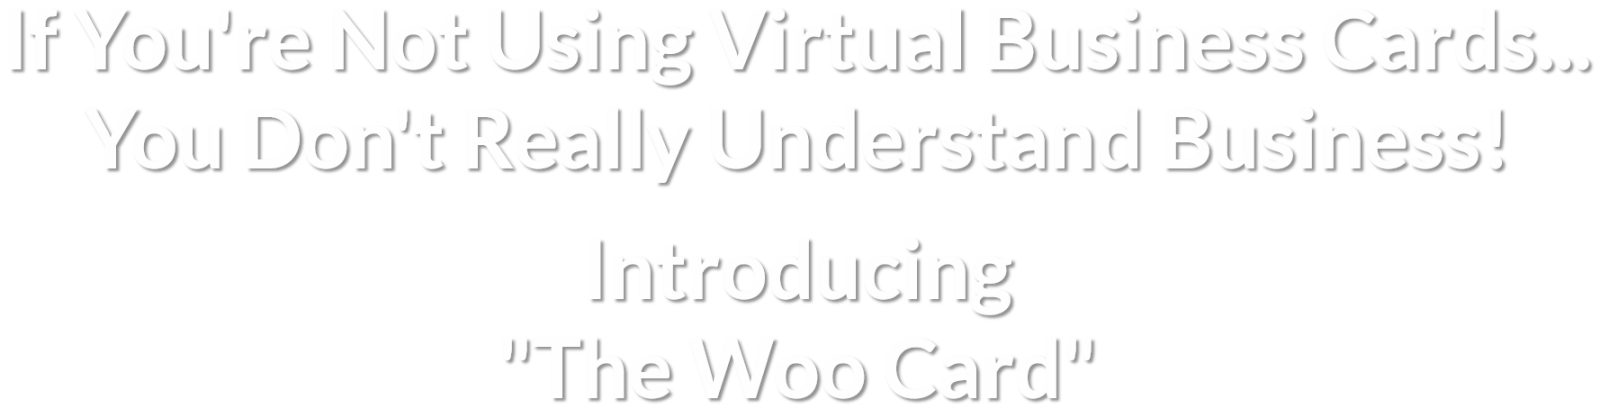 If You're Not Using Virtual Business Cards... You Don't Really Understand Business!  Introducing "The Woo Card Woo"